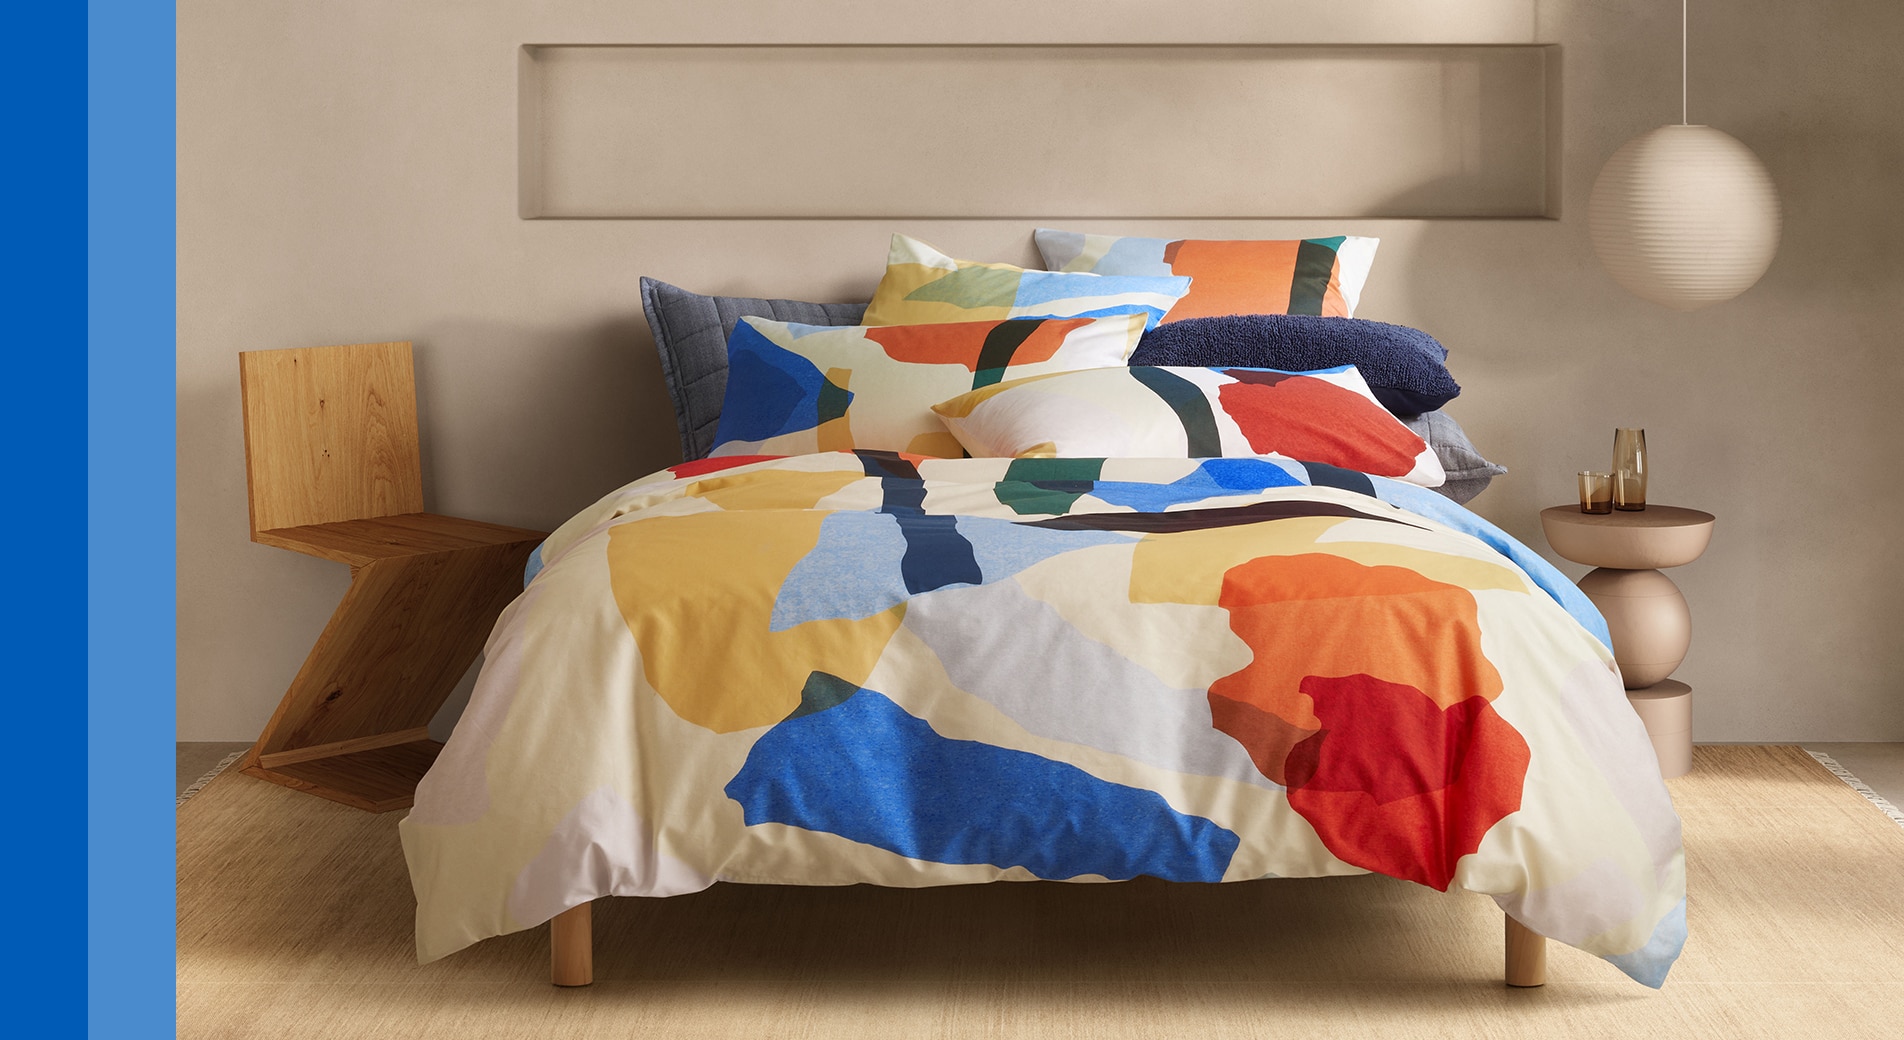 how to style a maximalist bed. image of multicoloured bed with abstract print, placed in a bedroom. two blue stripes are on the left hand side.